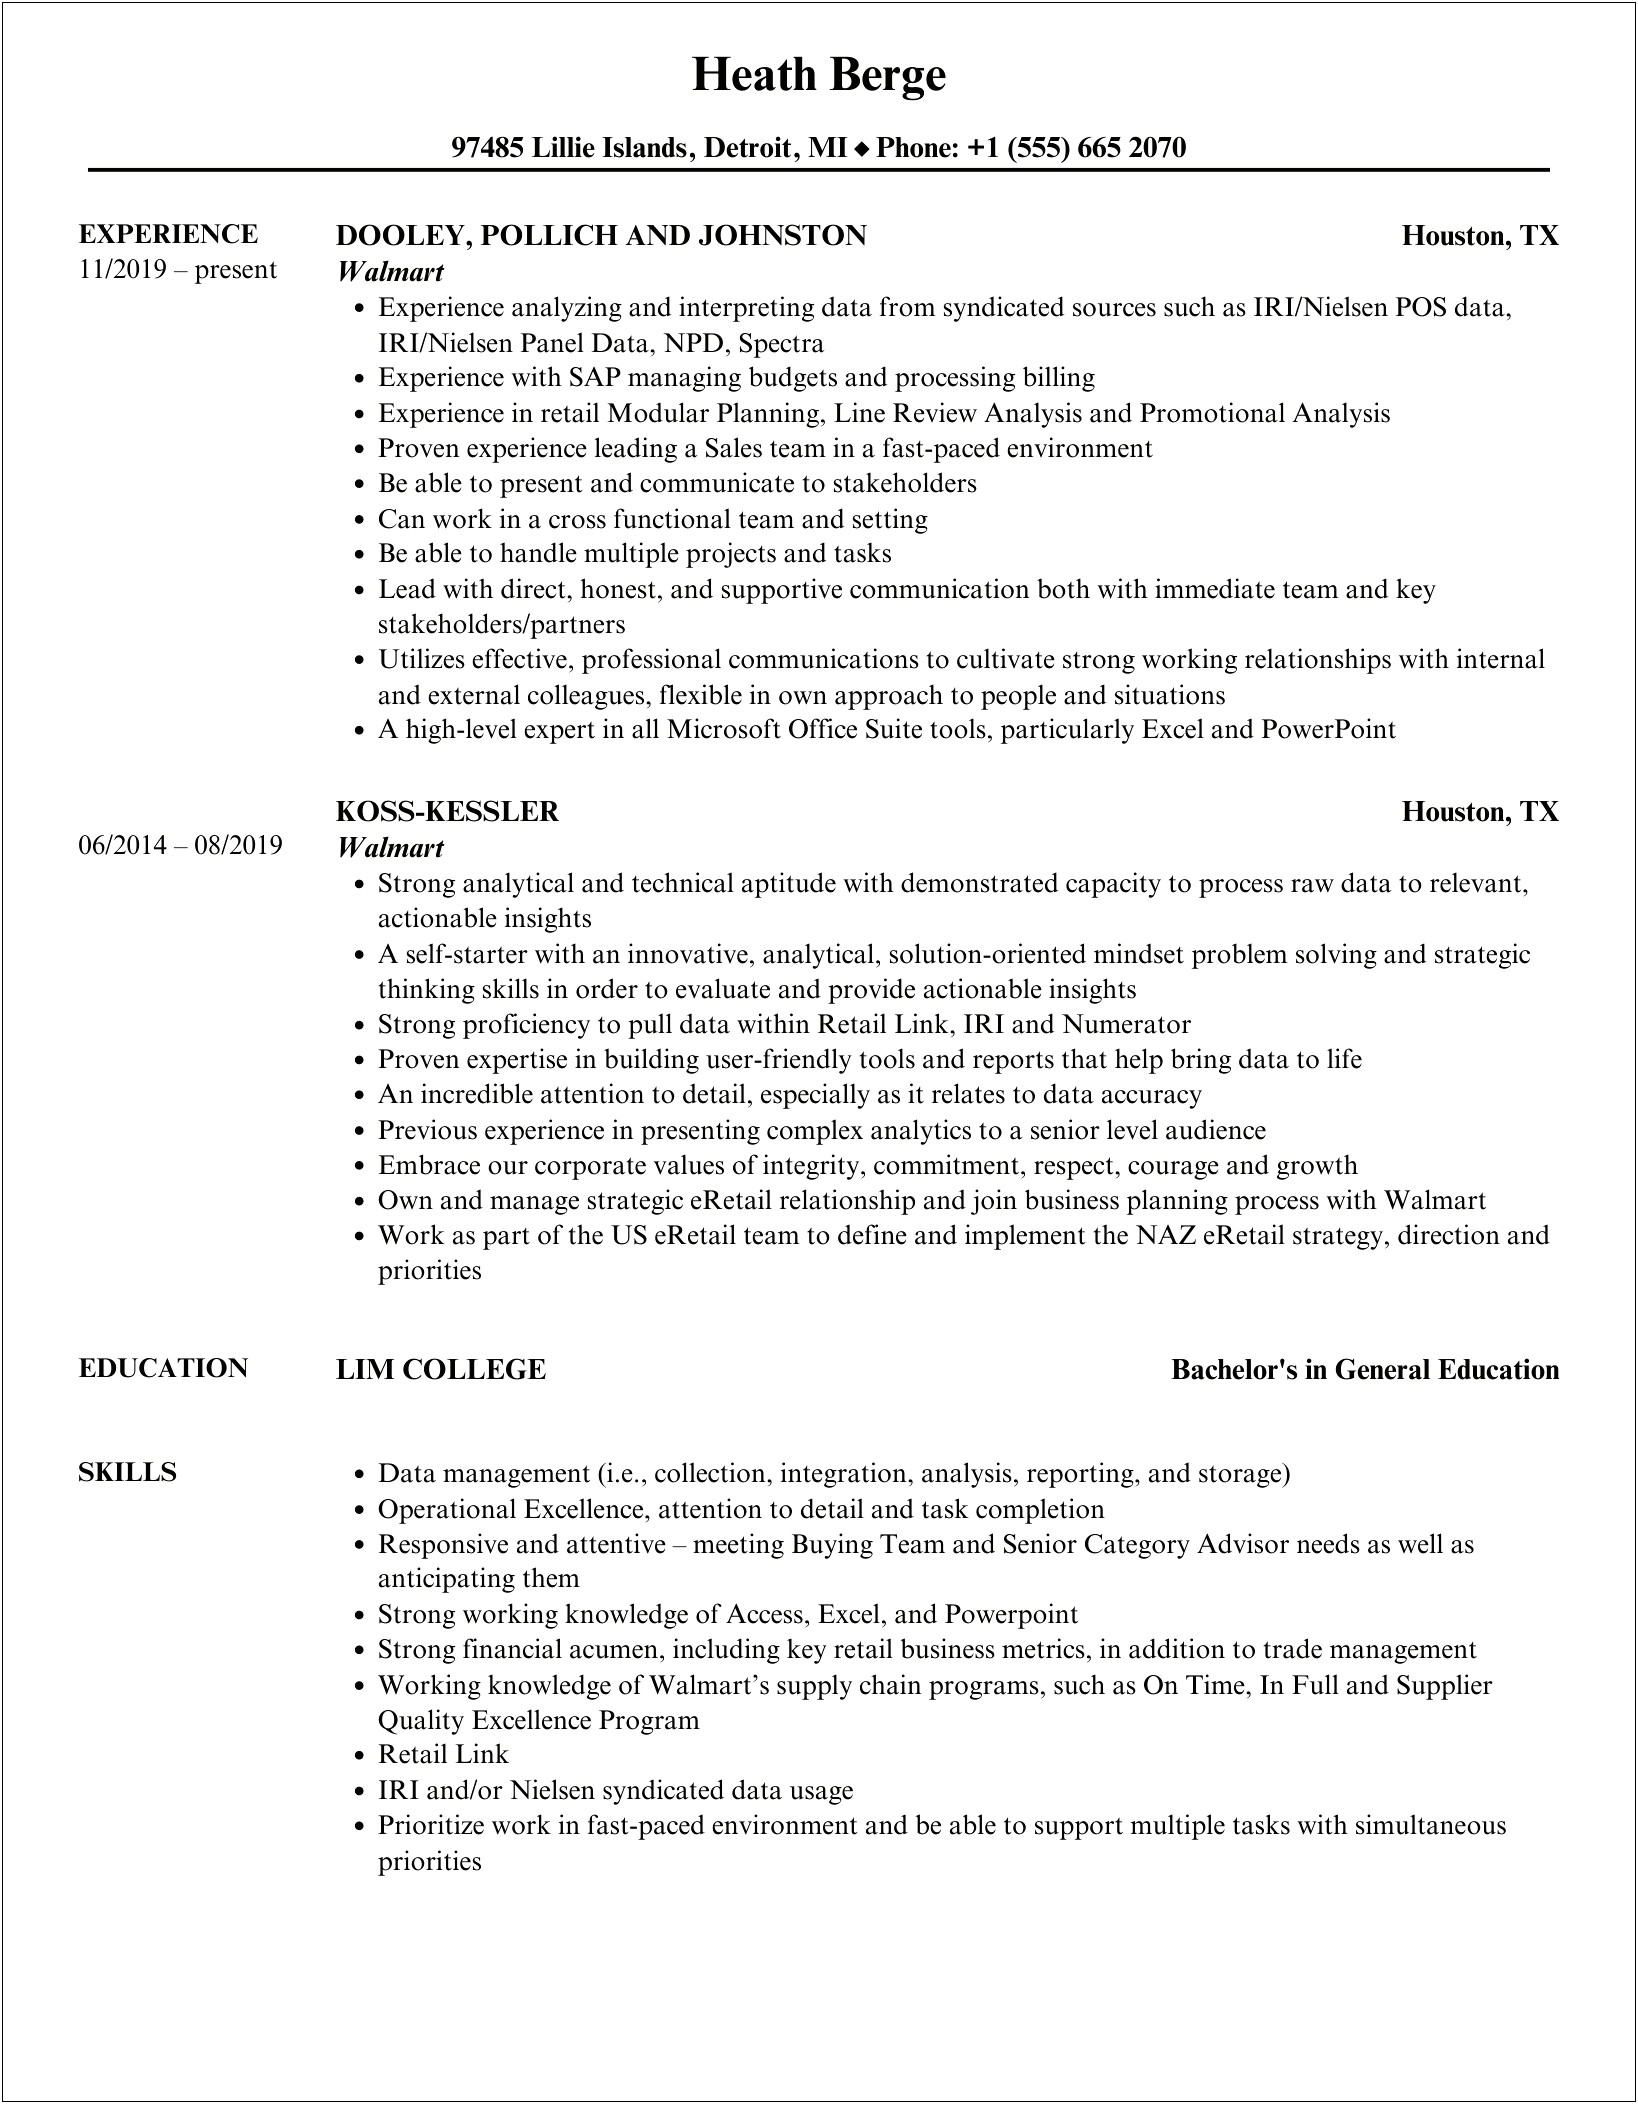 Resume Examples For Shopback Workers At Walmart